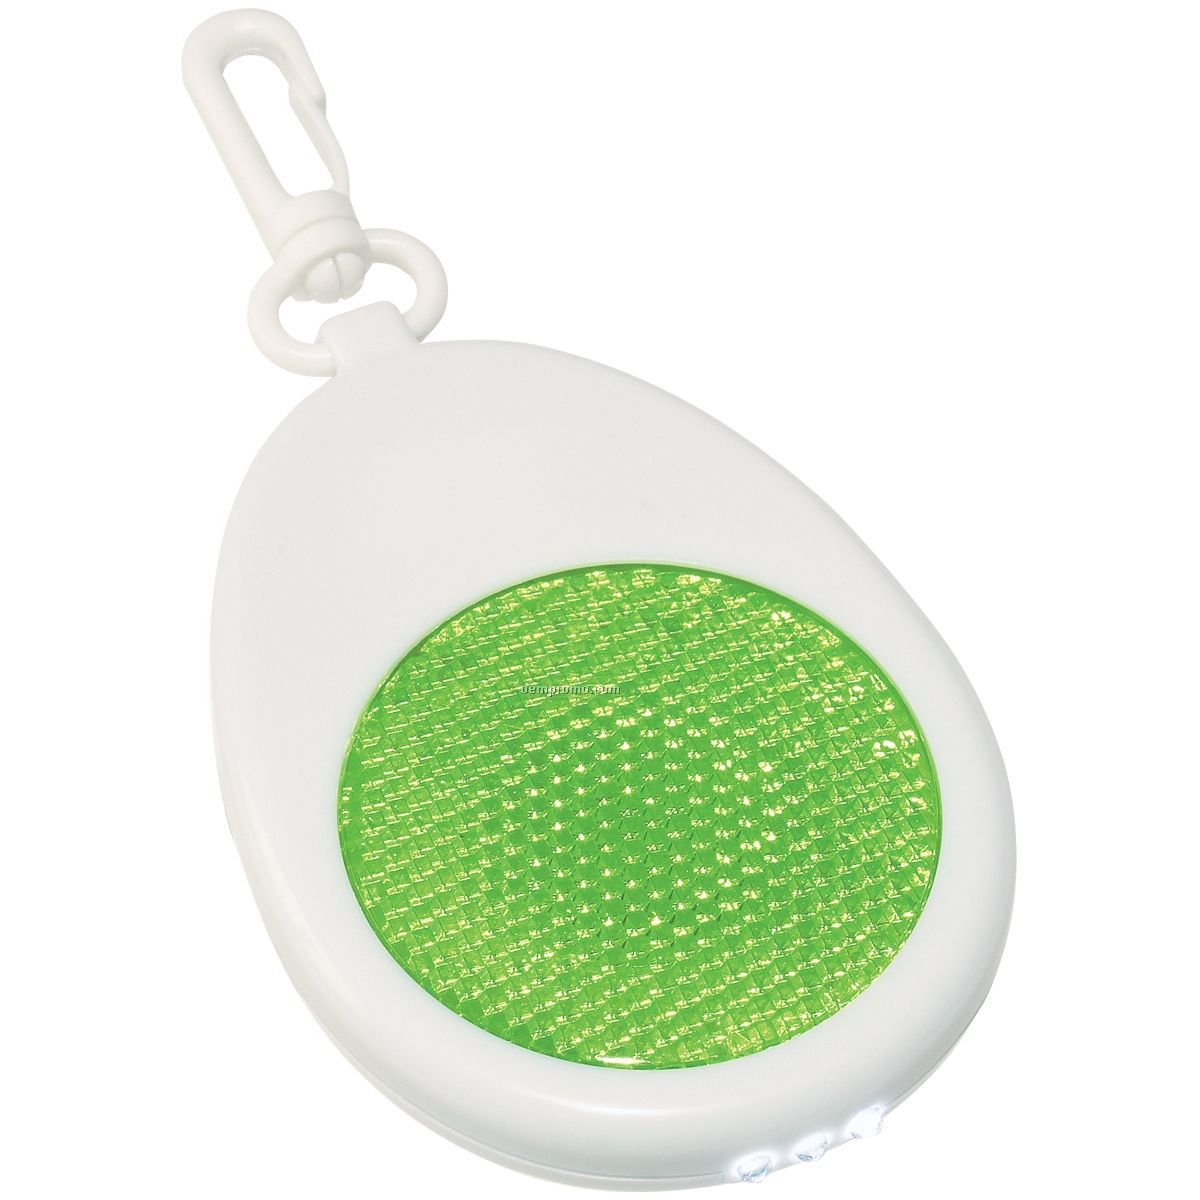 Green Oval Light Up Reflector W/ White Clip & Green LED